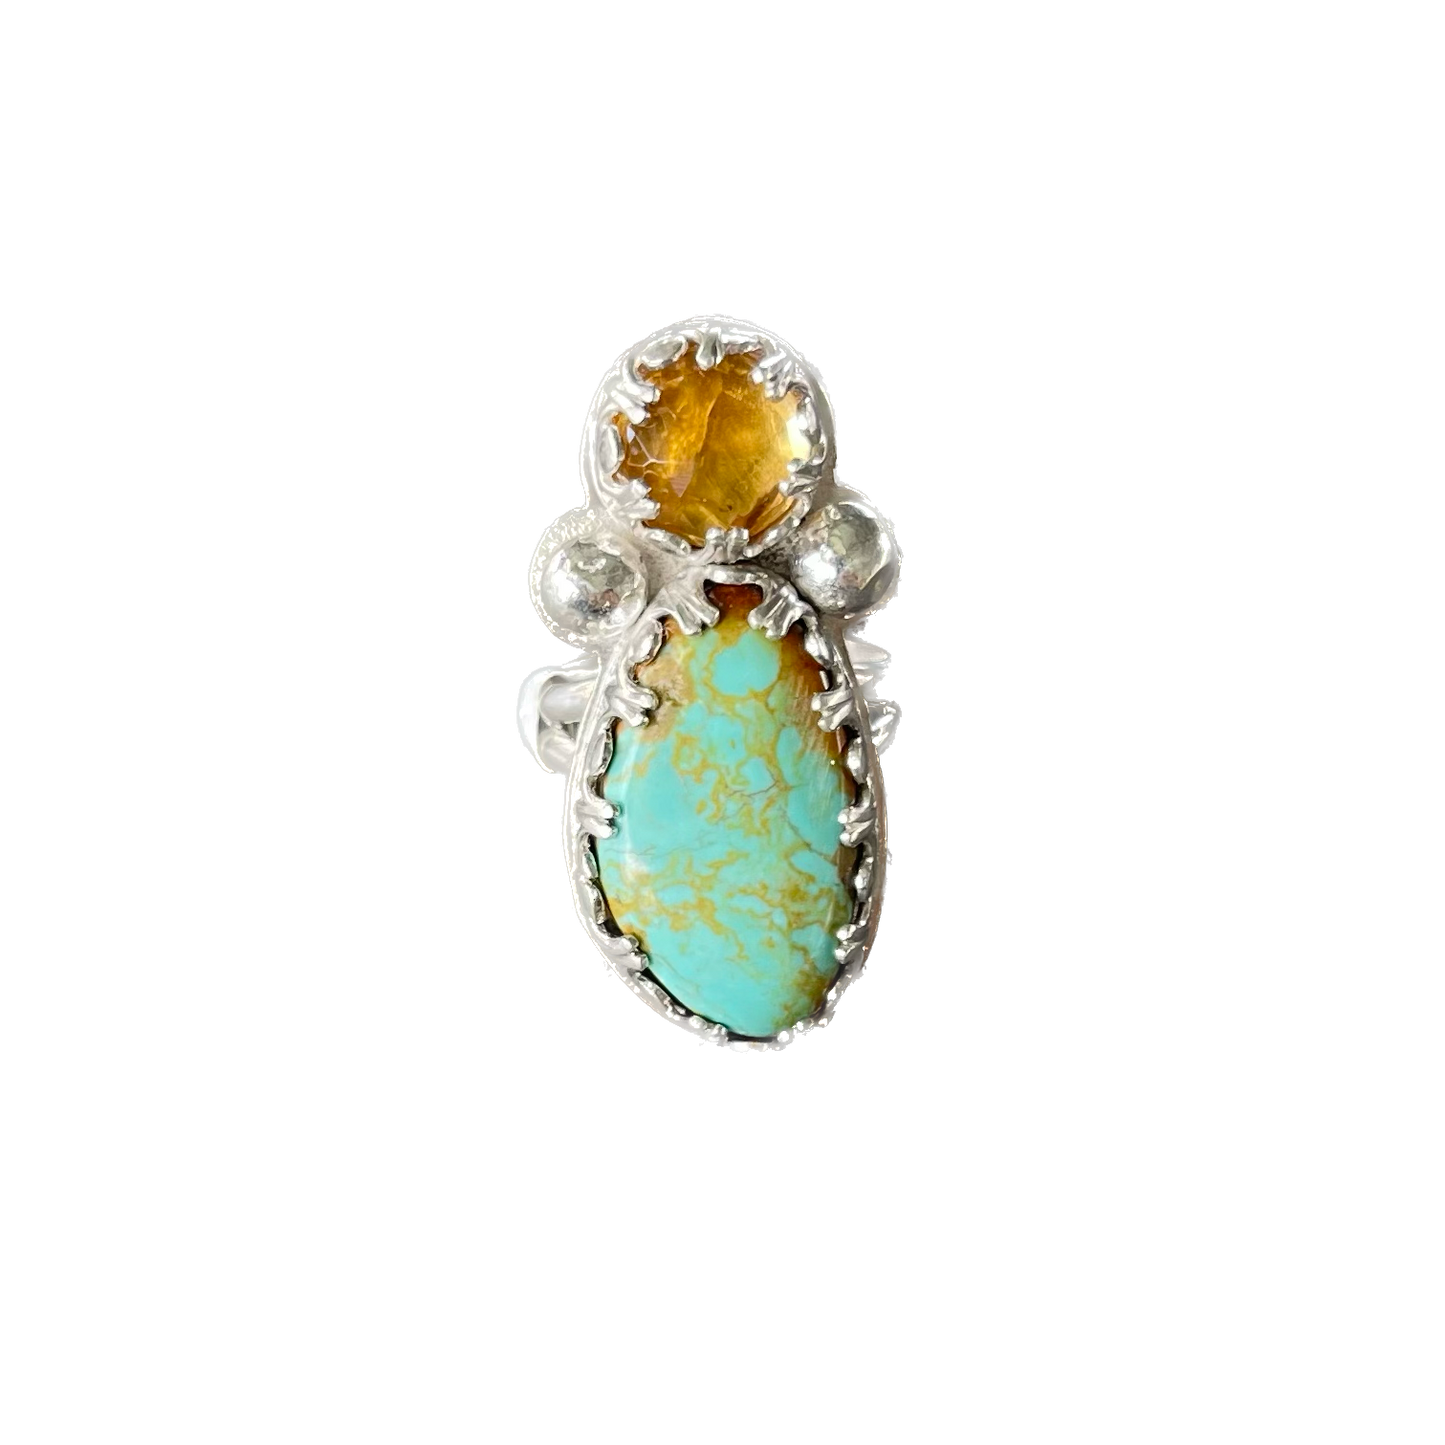 Turquoise and Citrine ring